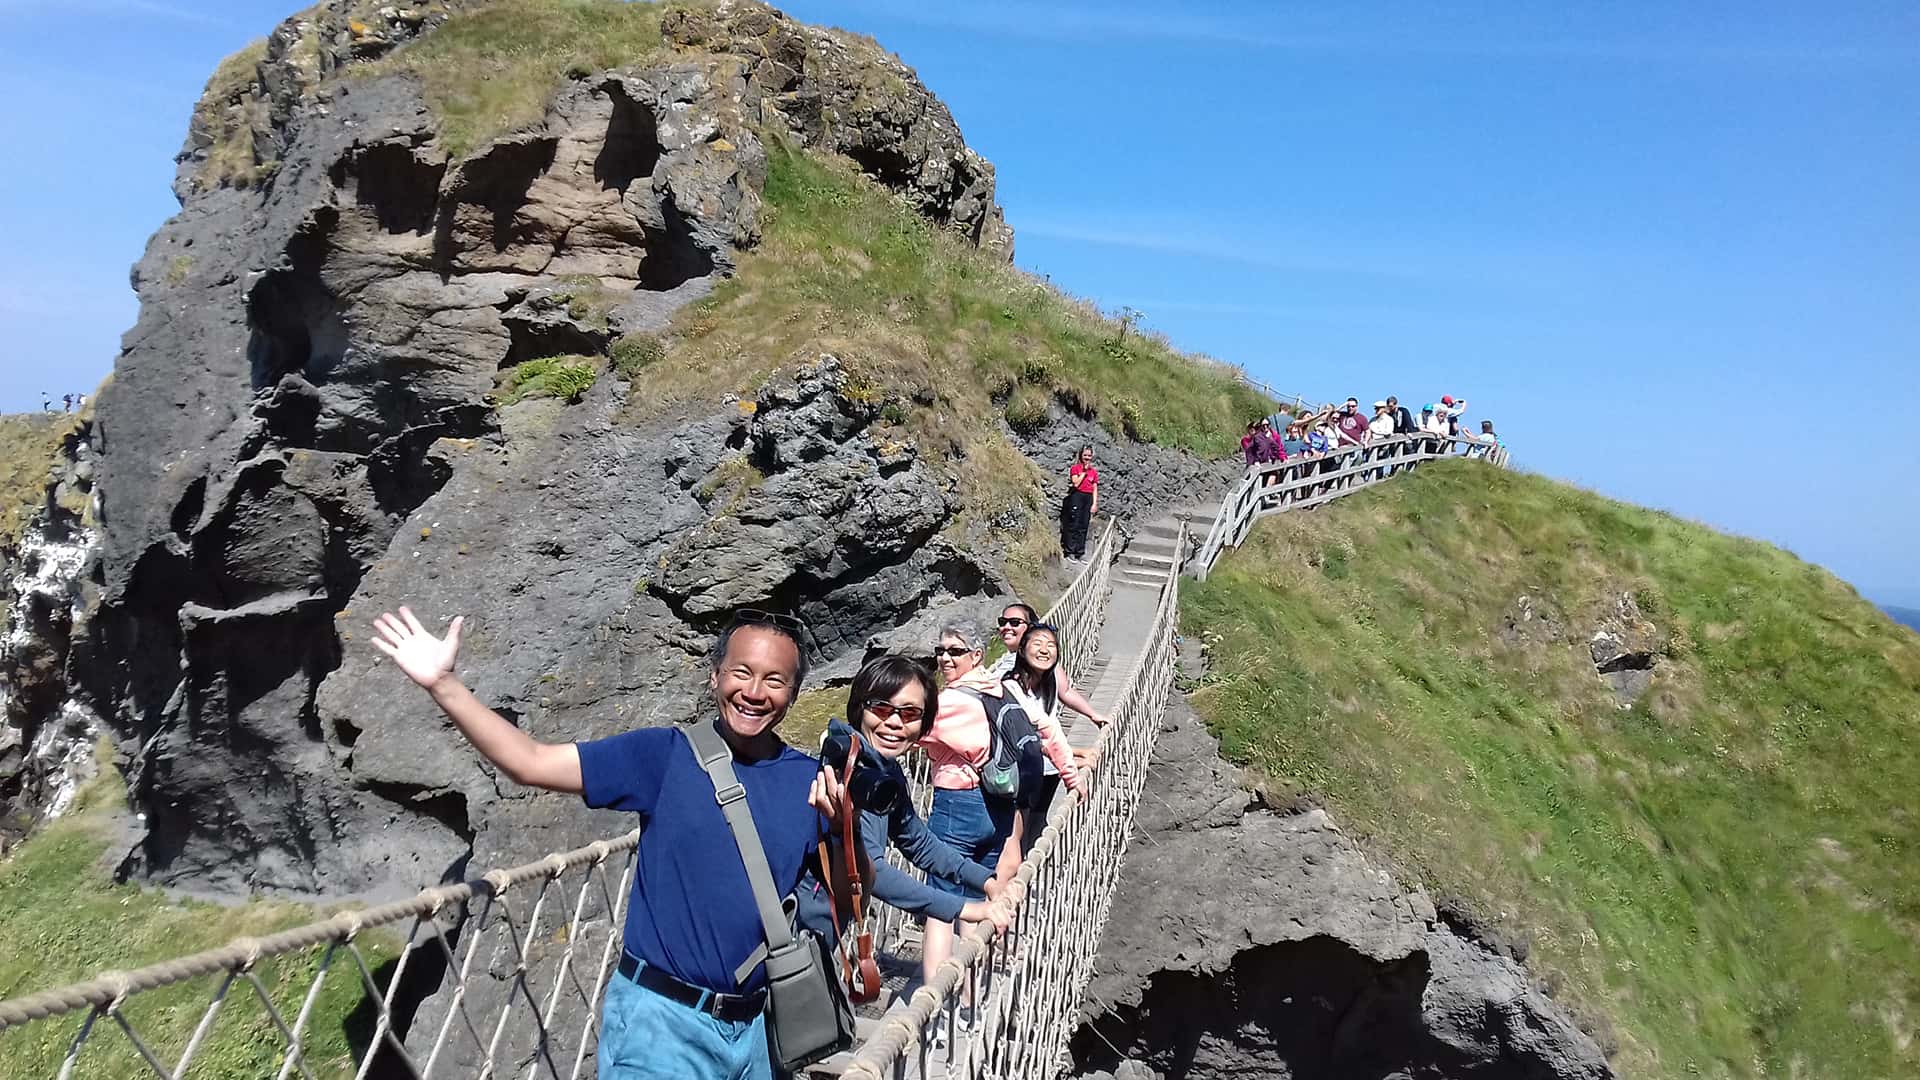 Carrick a Rede group Photo